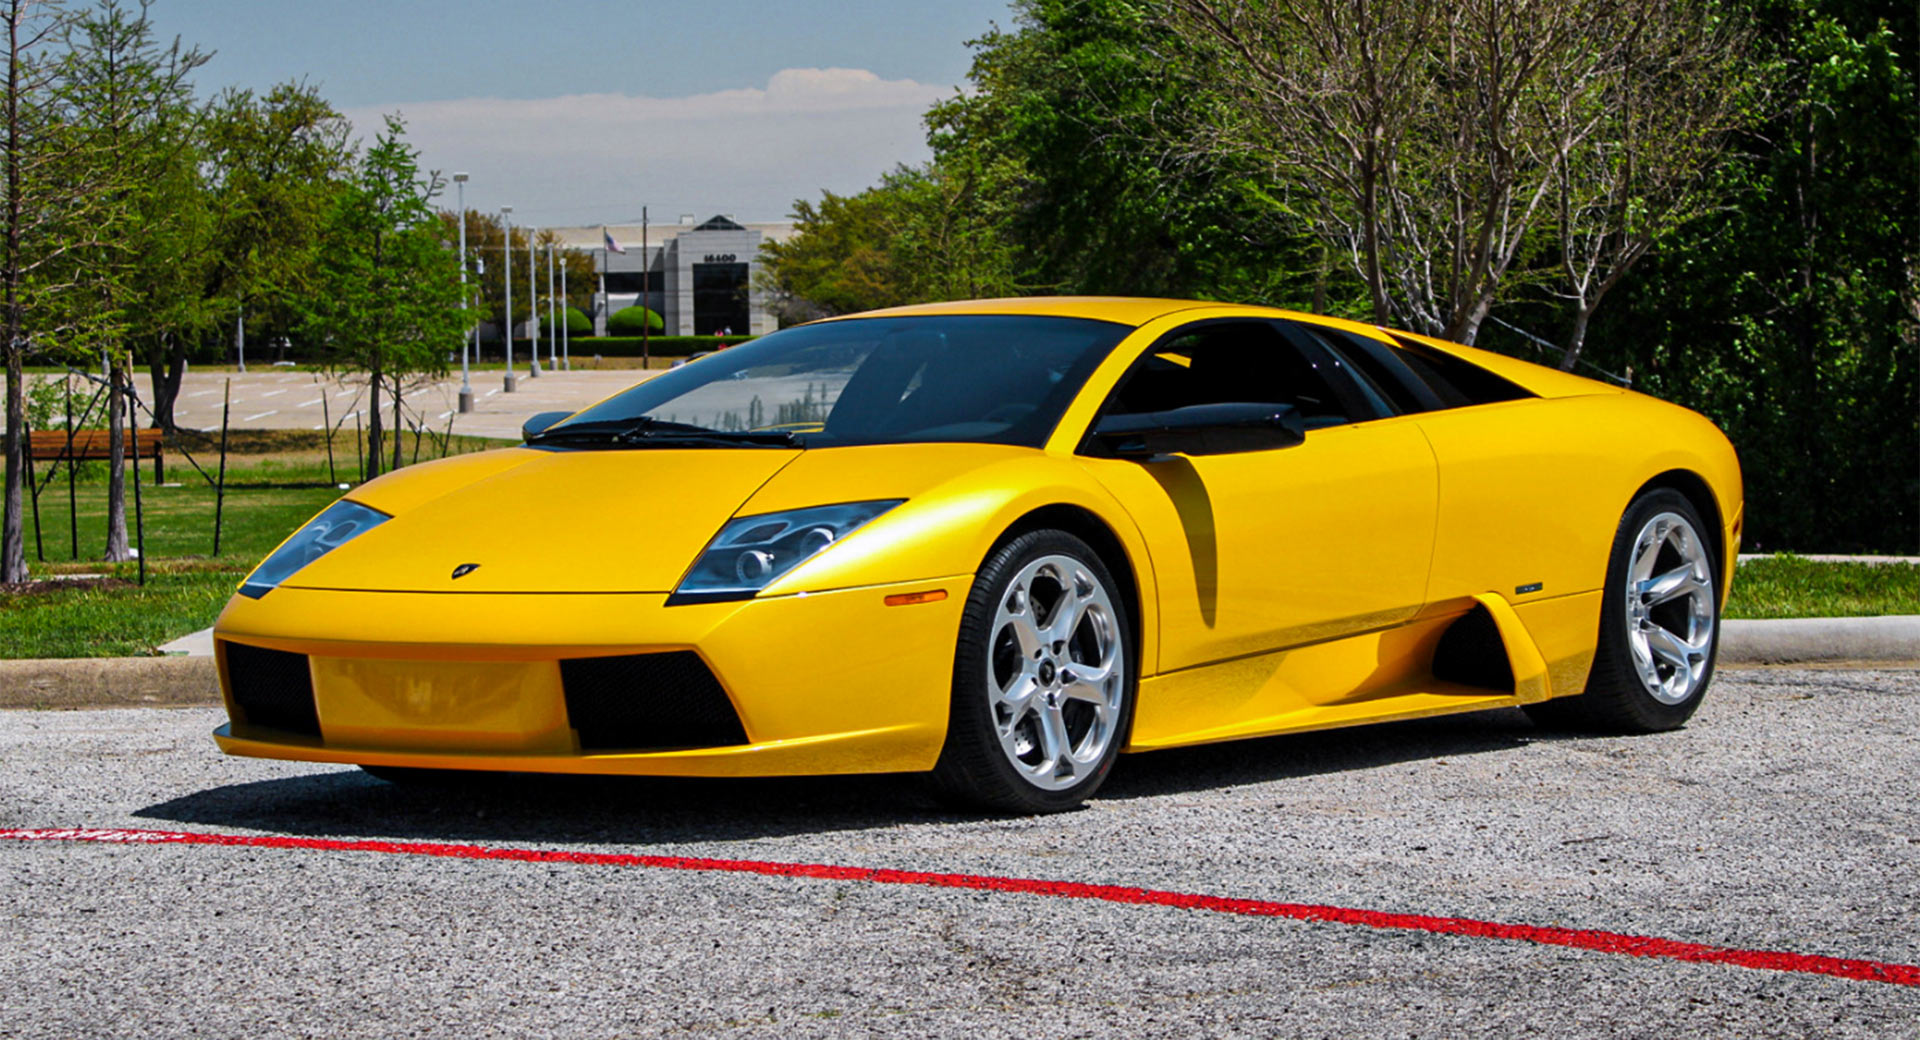 mental værksted afbryde A Six-Speed Lamborghini Murcielago From 2003 Just Sold For $400,000 |  Carscoops